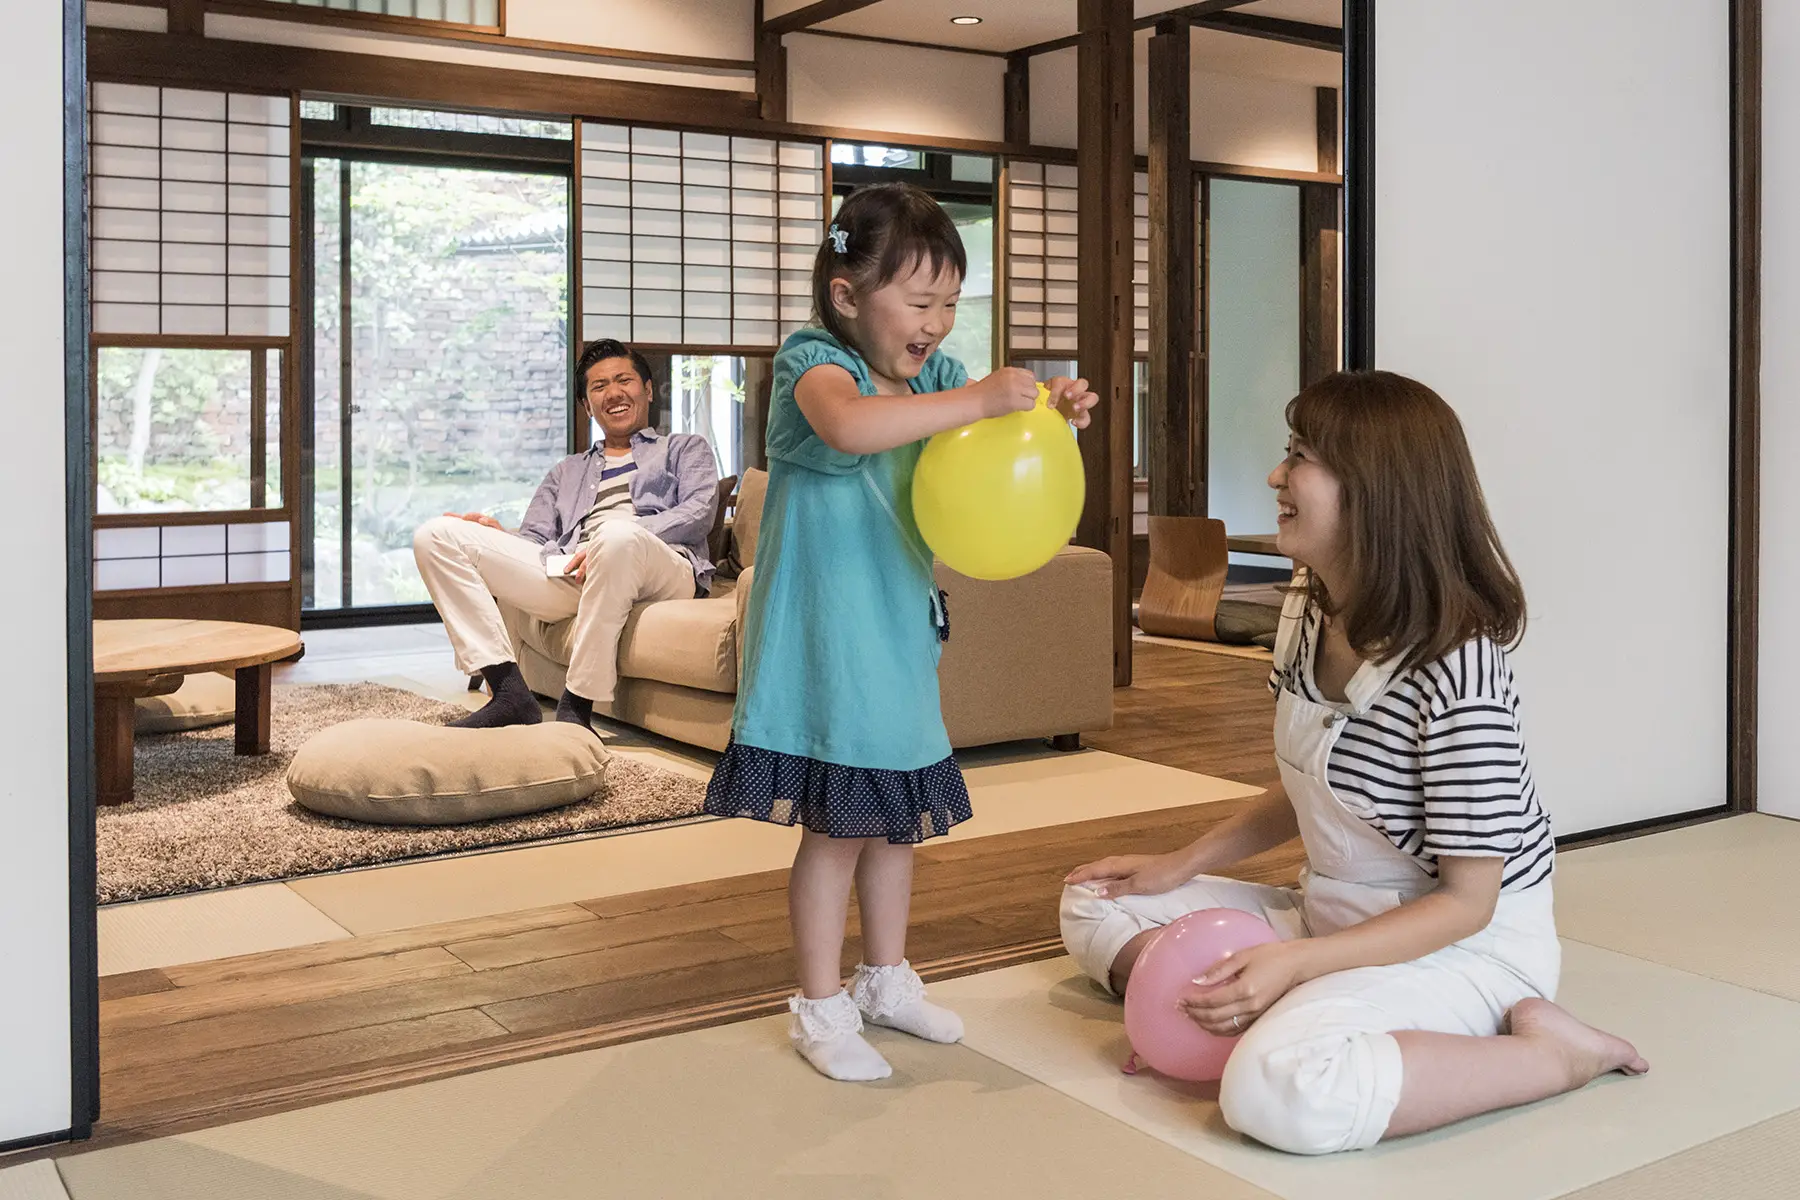 Japanese family in their home, with little girl playing with a yellow balloon